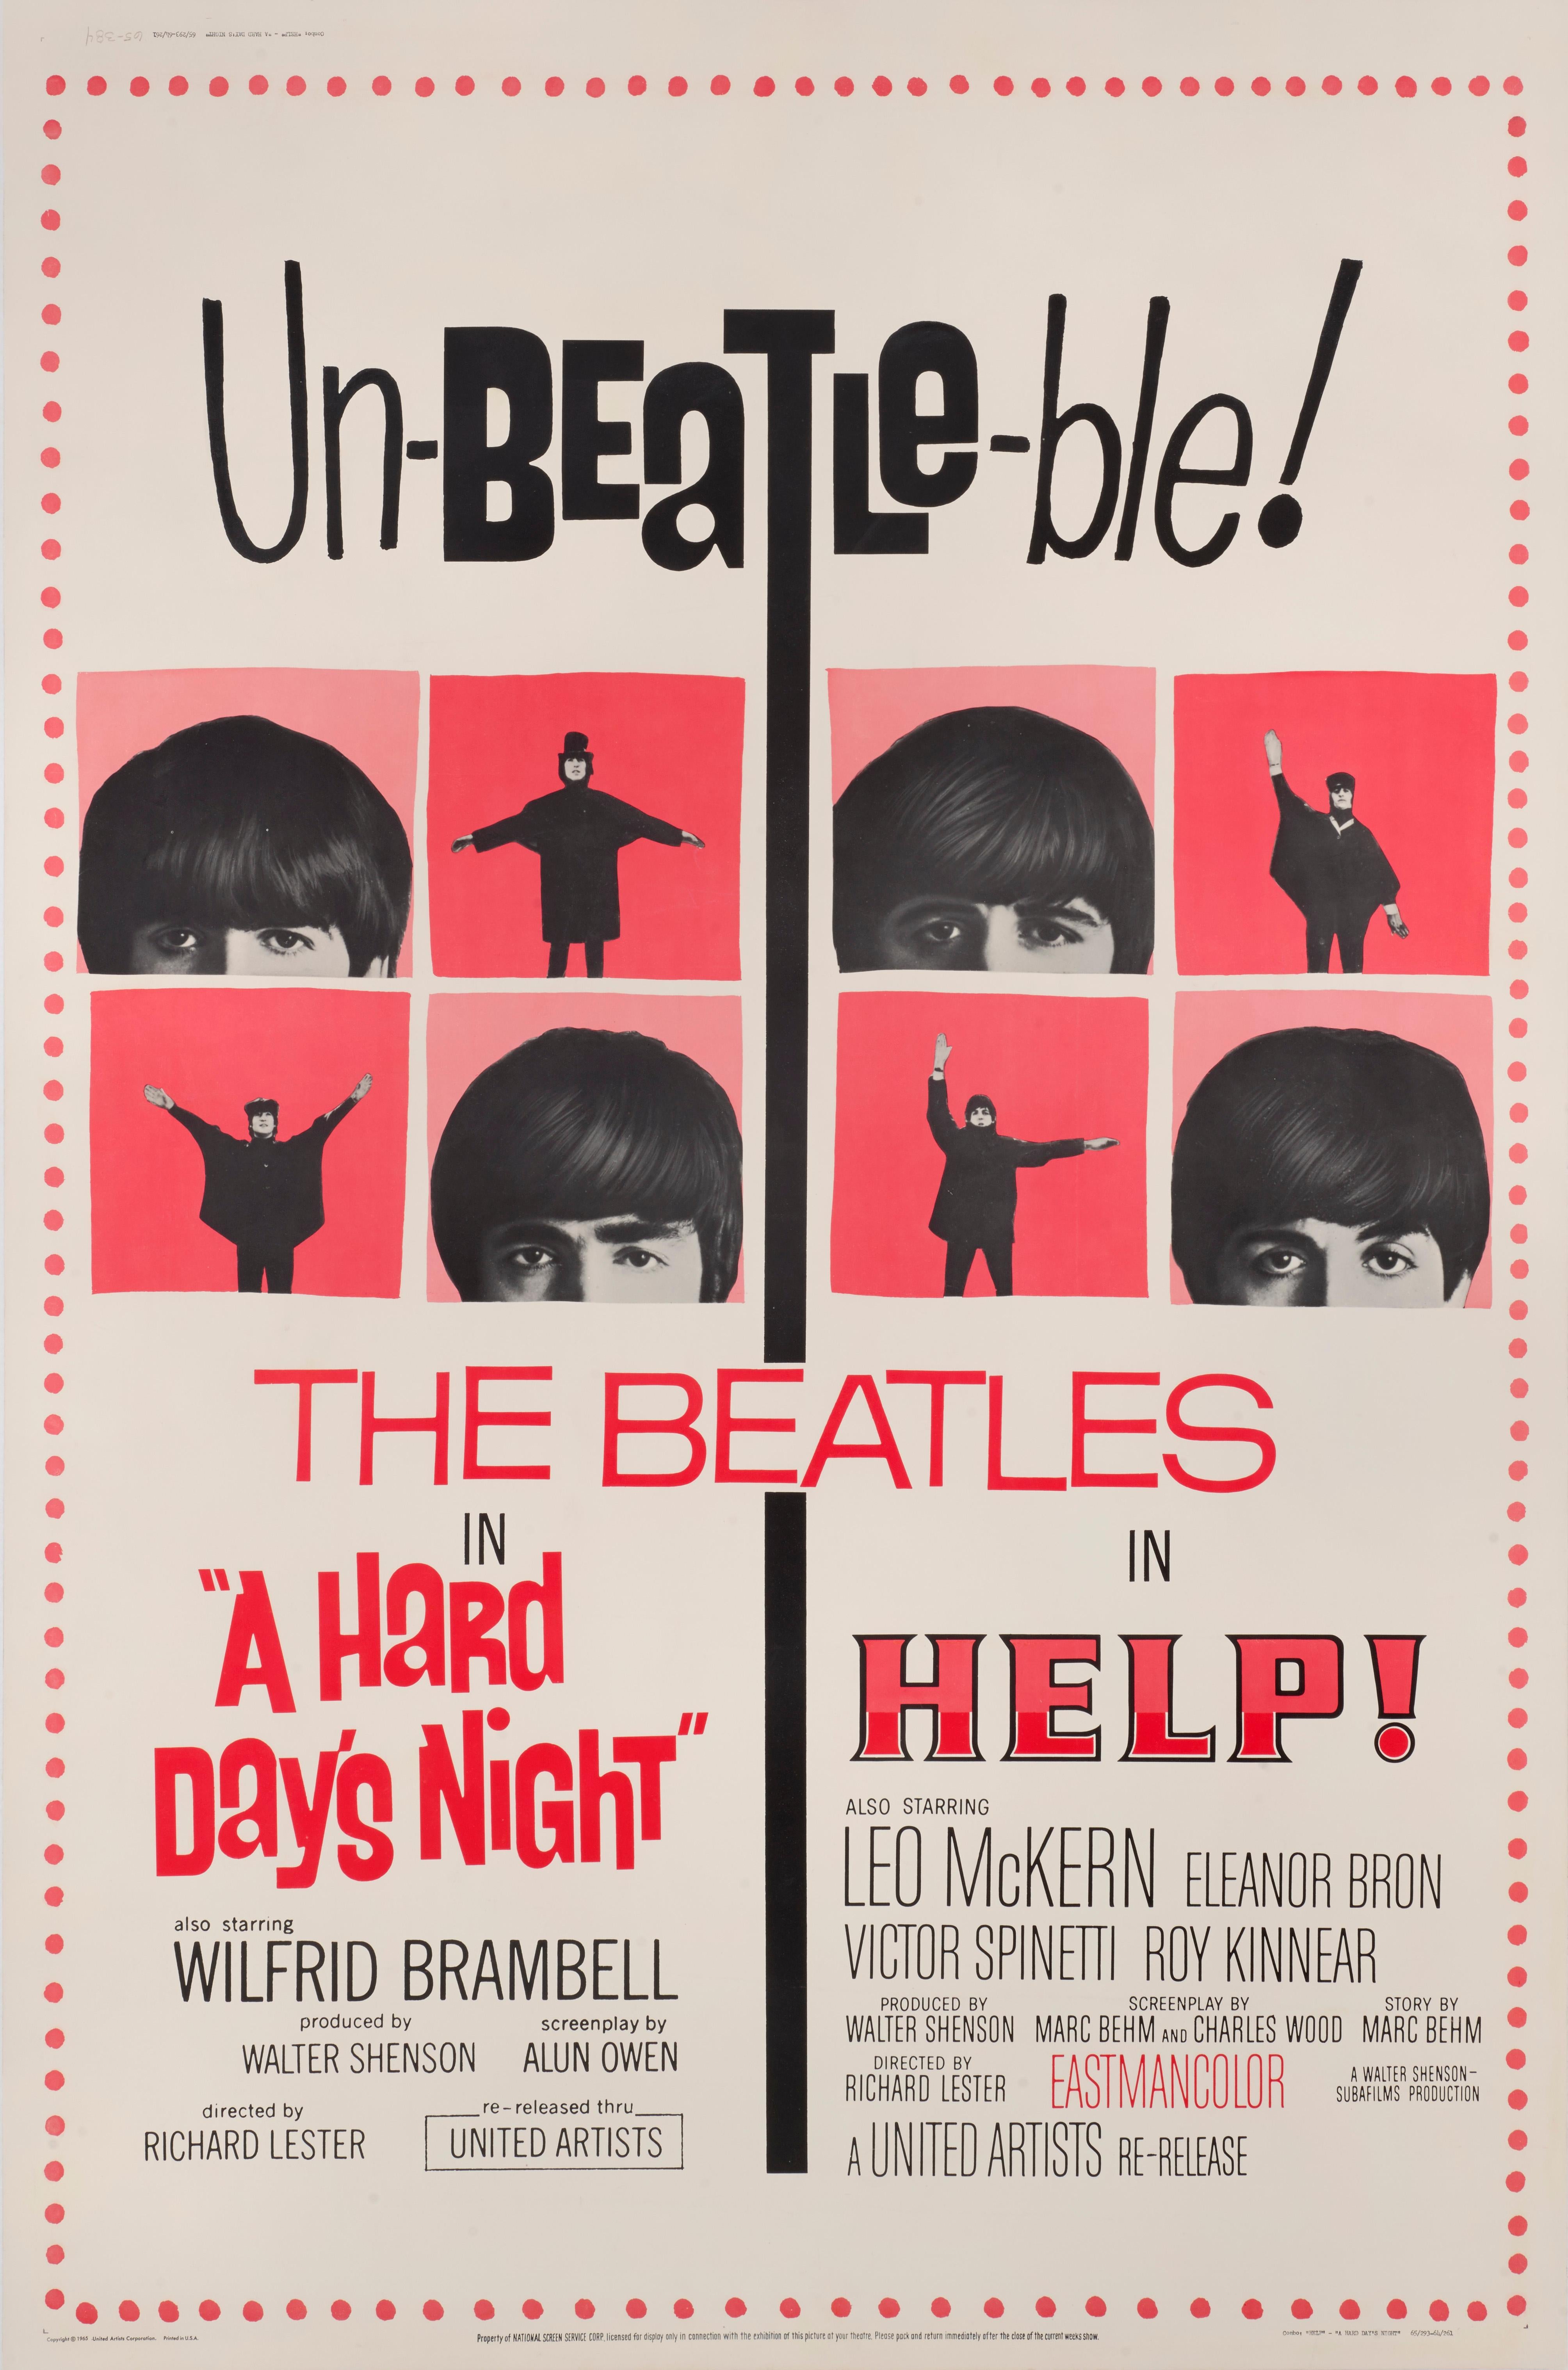 Original American film poster. This is a double bill poster for A Hard Day's Night / Help! This poster was designed for a short screening of a double bill of the first two Beatles films, shown in 1965.
As this double bill had a limited release, not